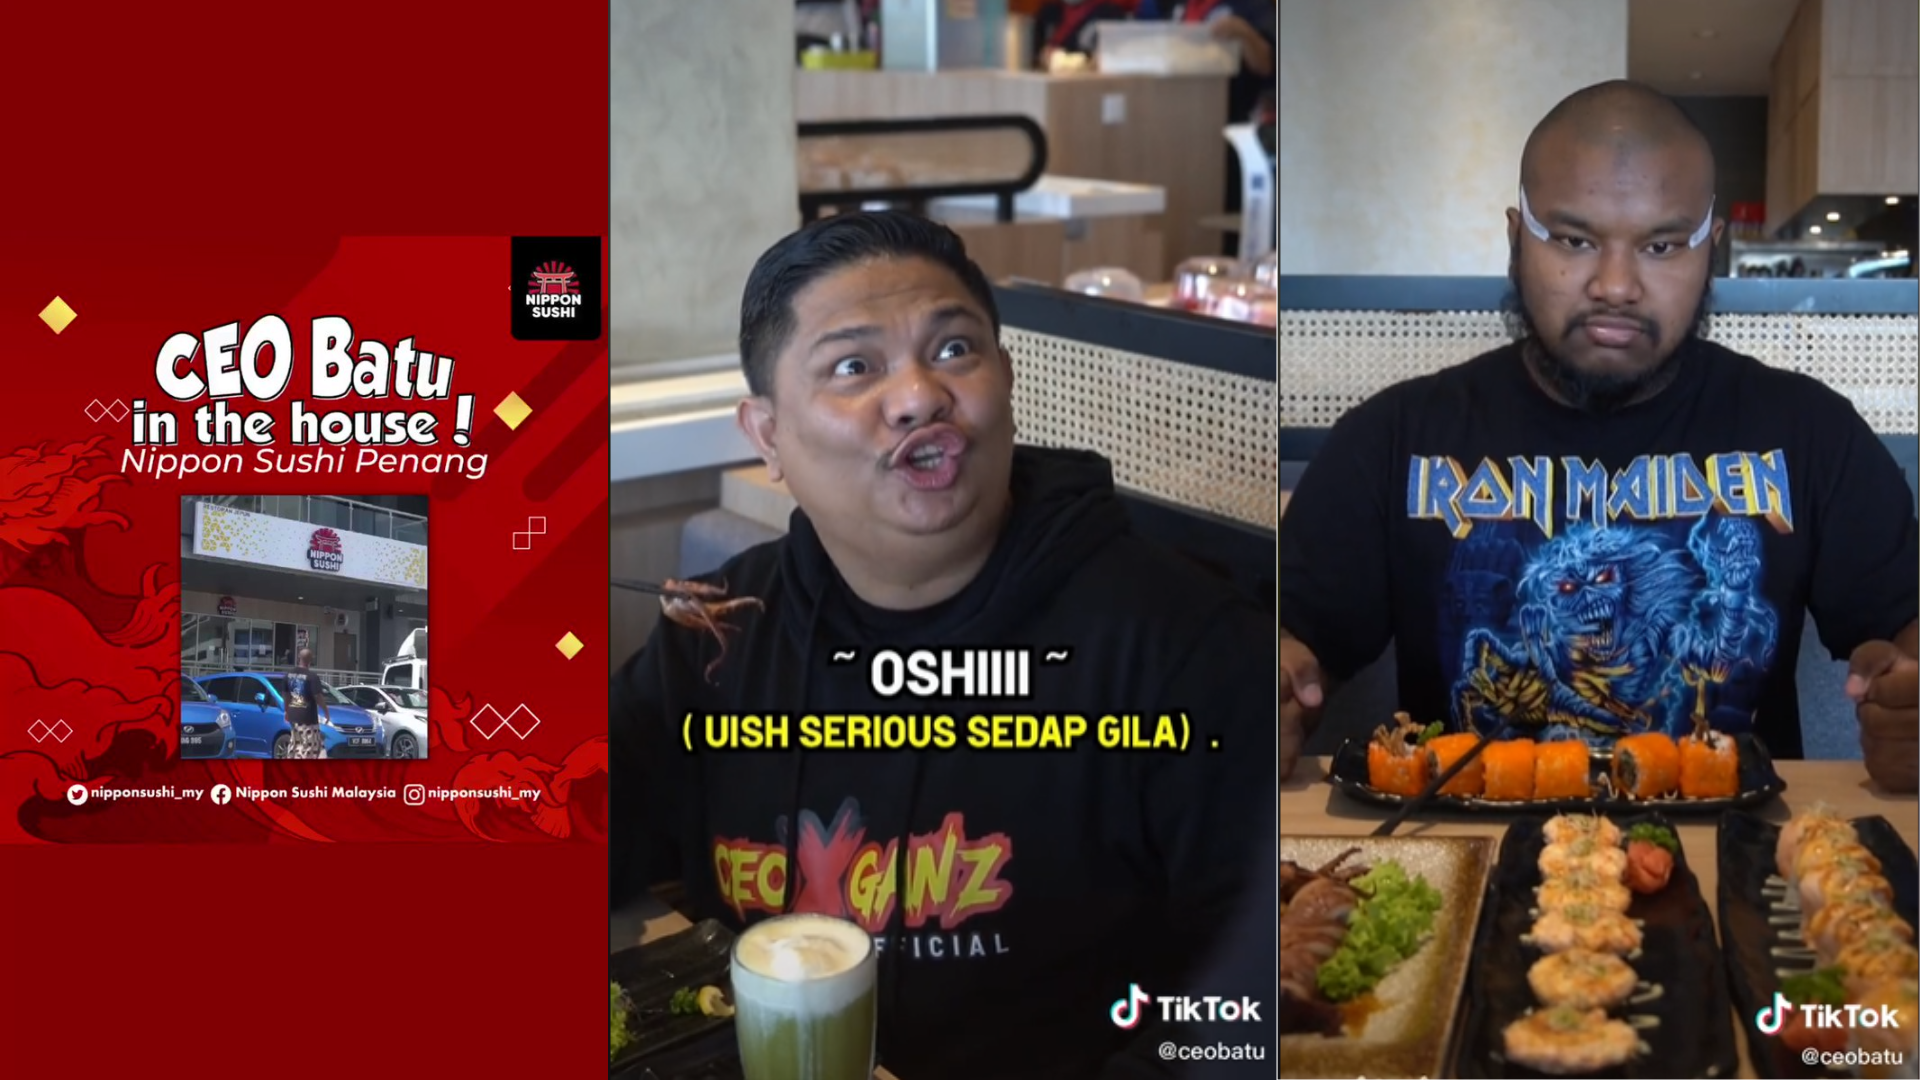 The collaboration video with a TikTok influencer, 'CEO Batu' caused a stir in the internet.